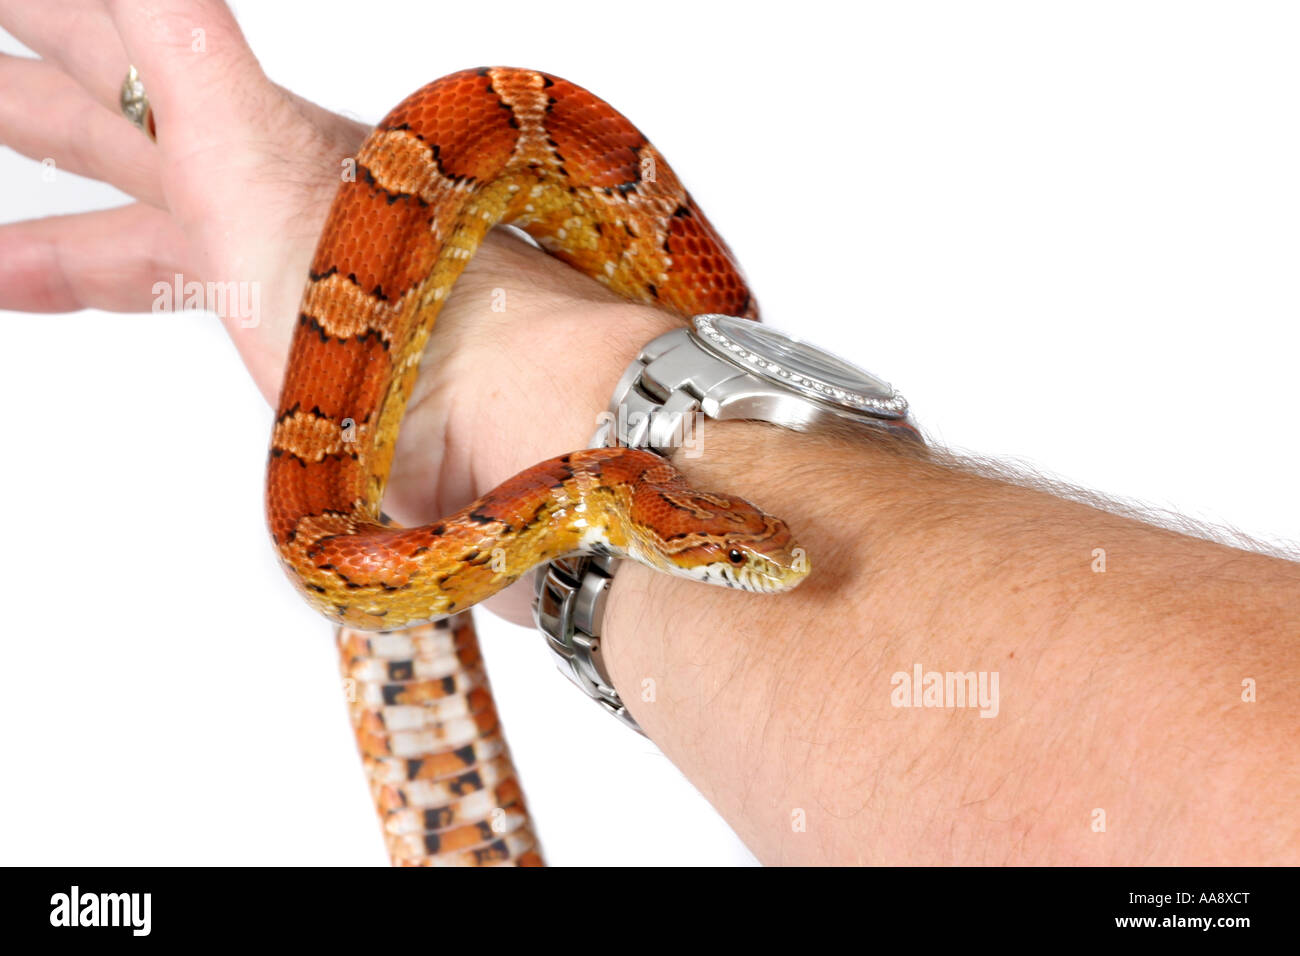 A studio photograph of a Corn Snake wrapped around a man's arm. Stock Photo